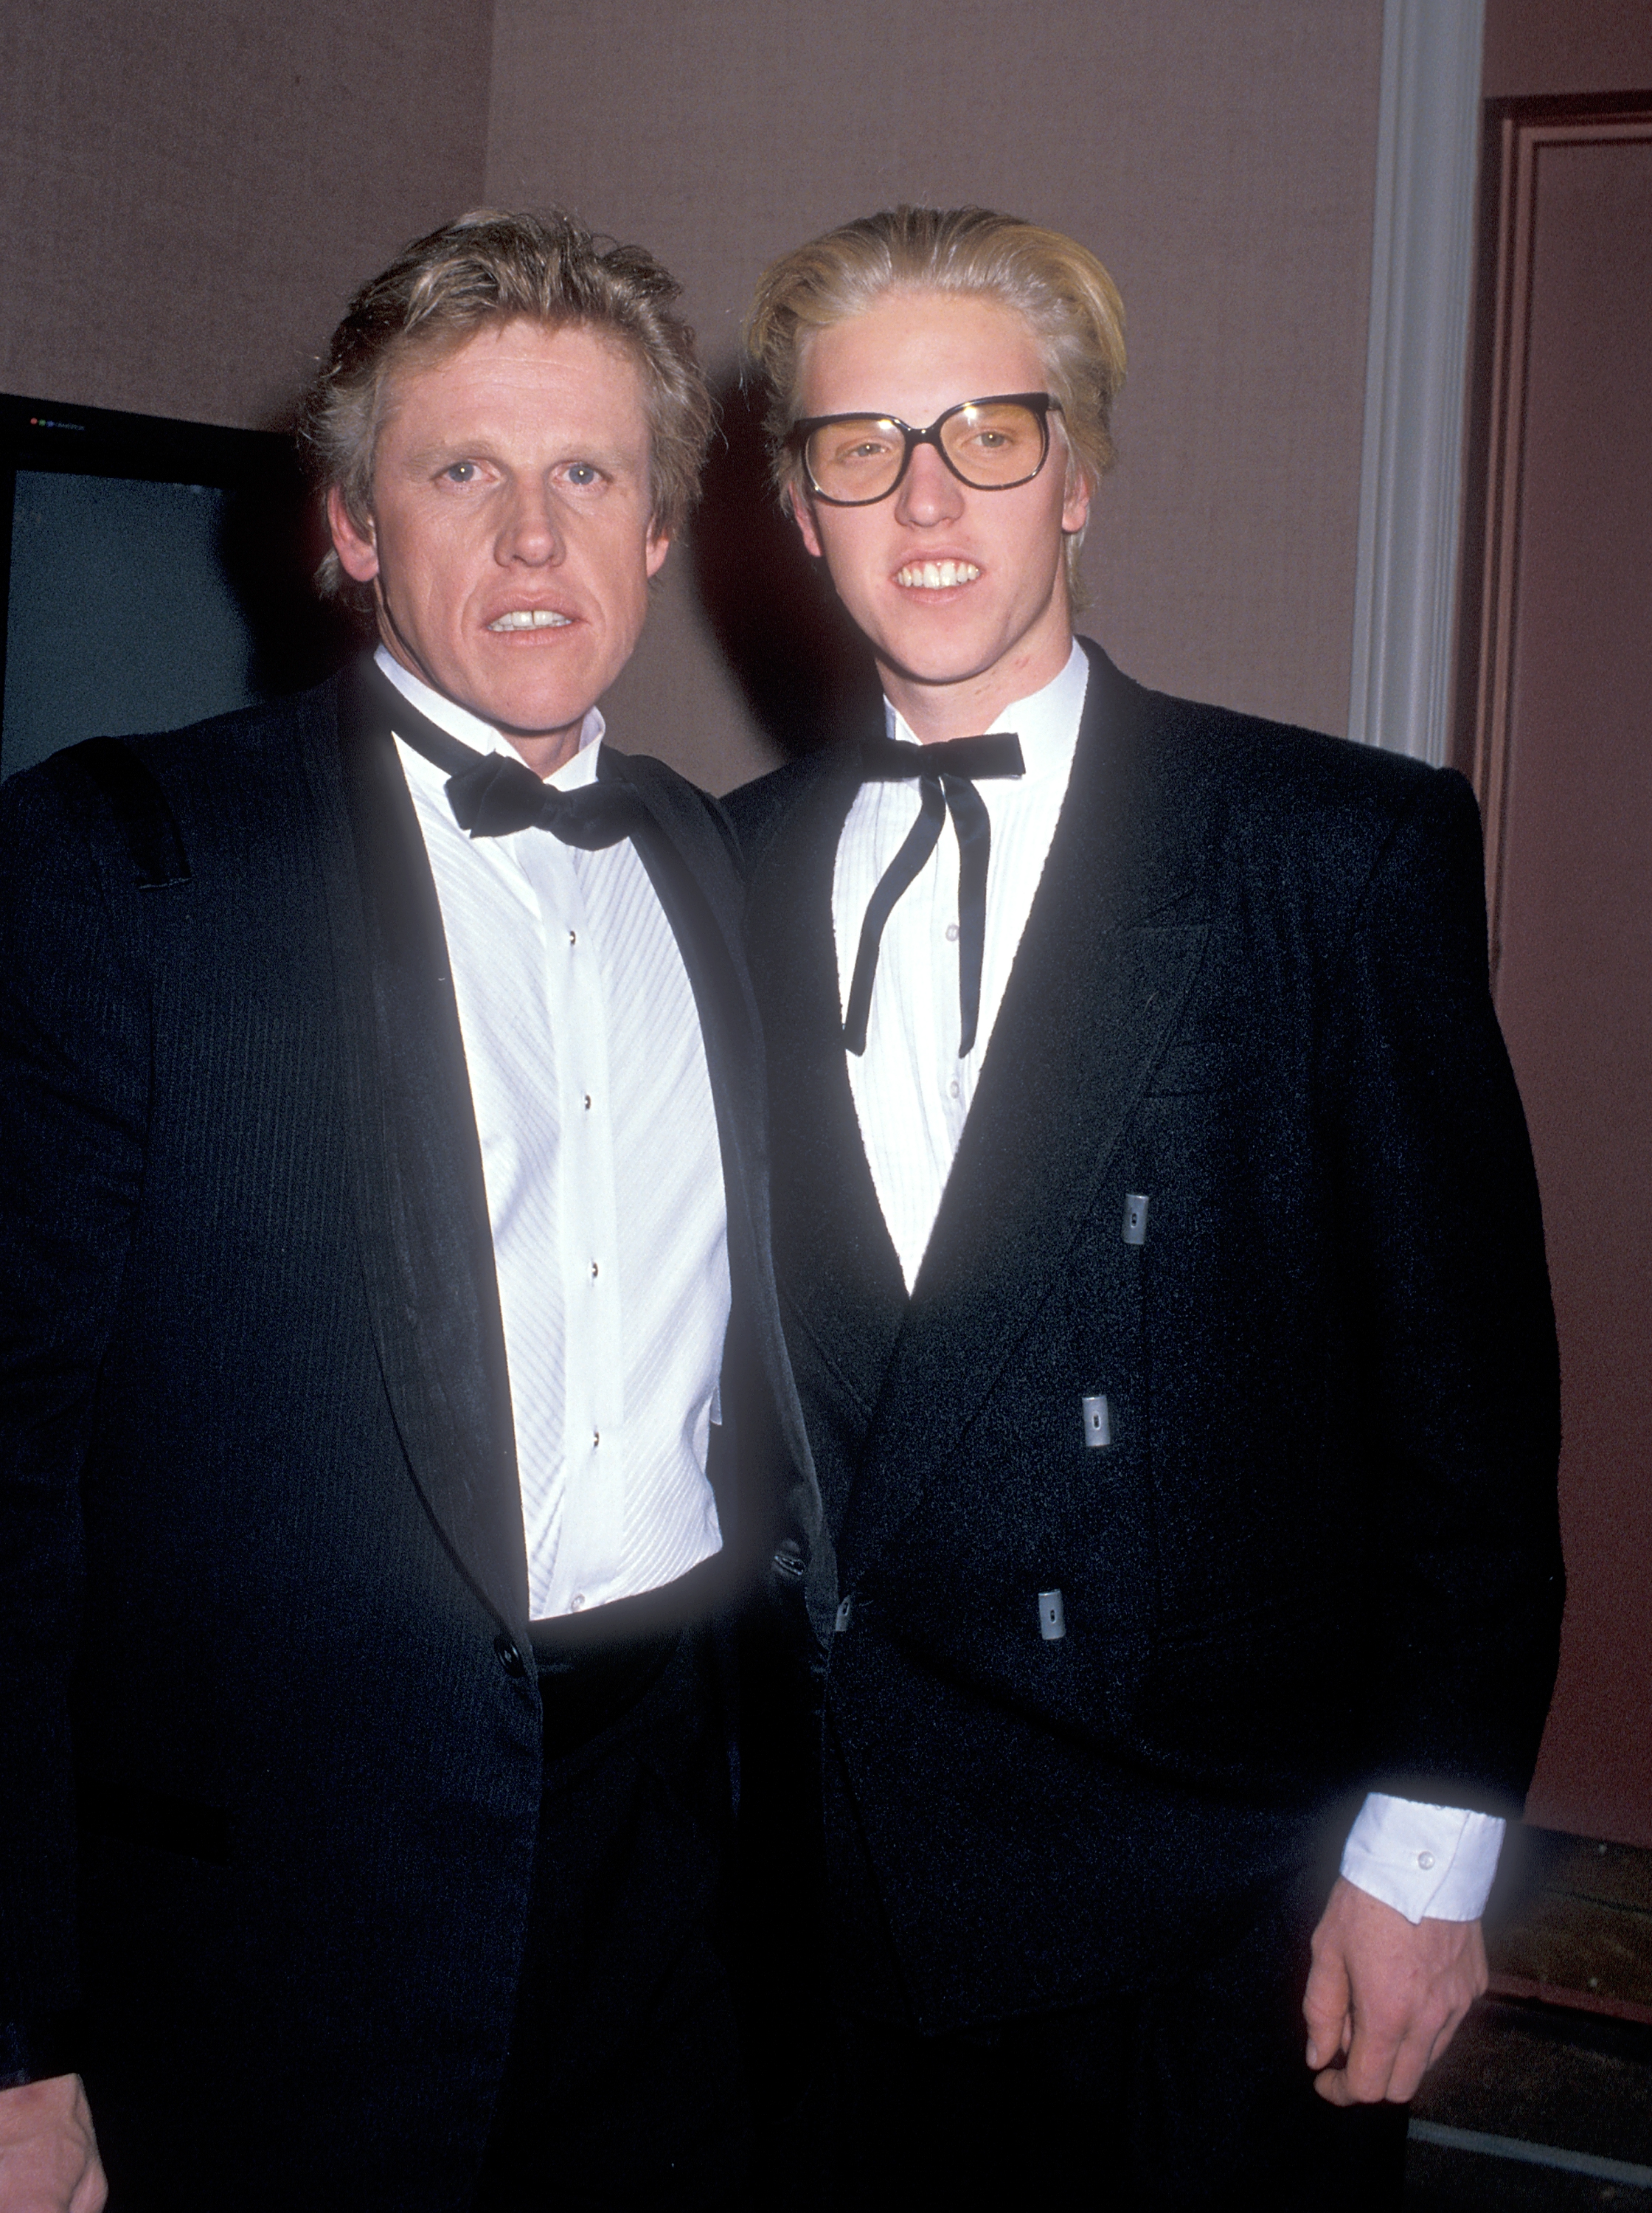 Gary Busey and his son Jake Busey attend the 47th Annual Golden Globe Awards at the Beverly Hilton Hotel in Beverly Hills, California on January 20, 1990. | Source: Getty Images